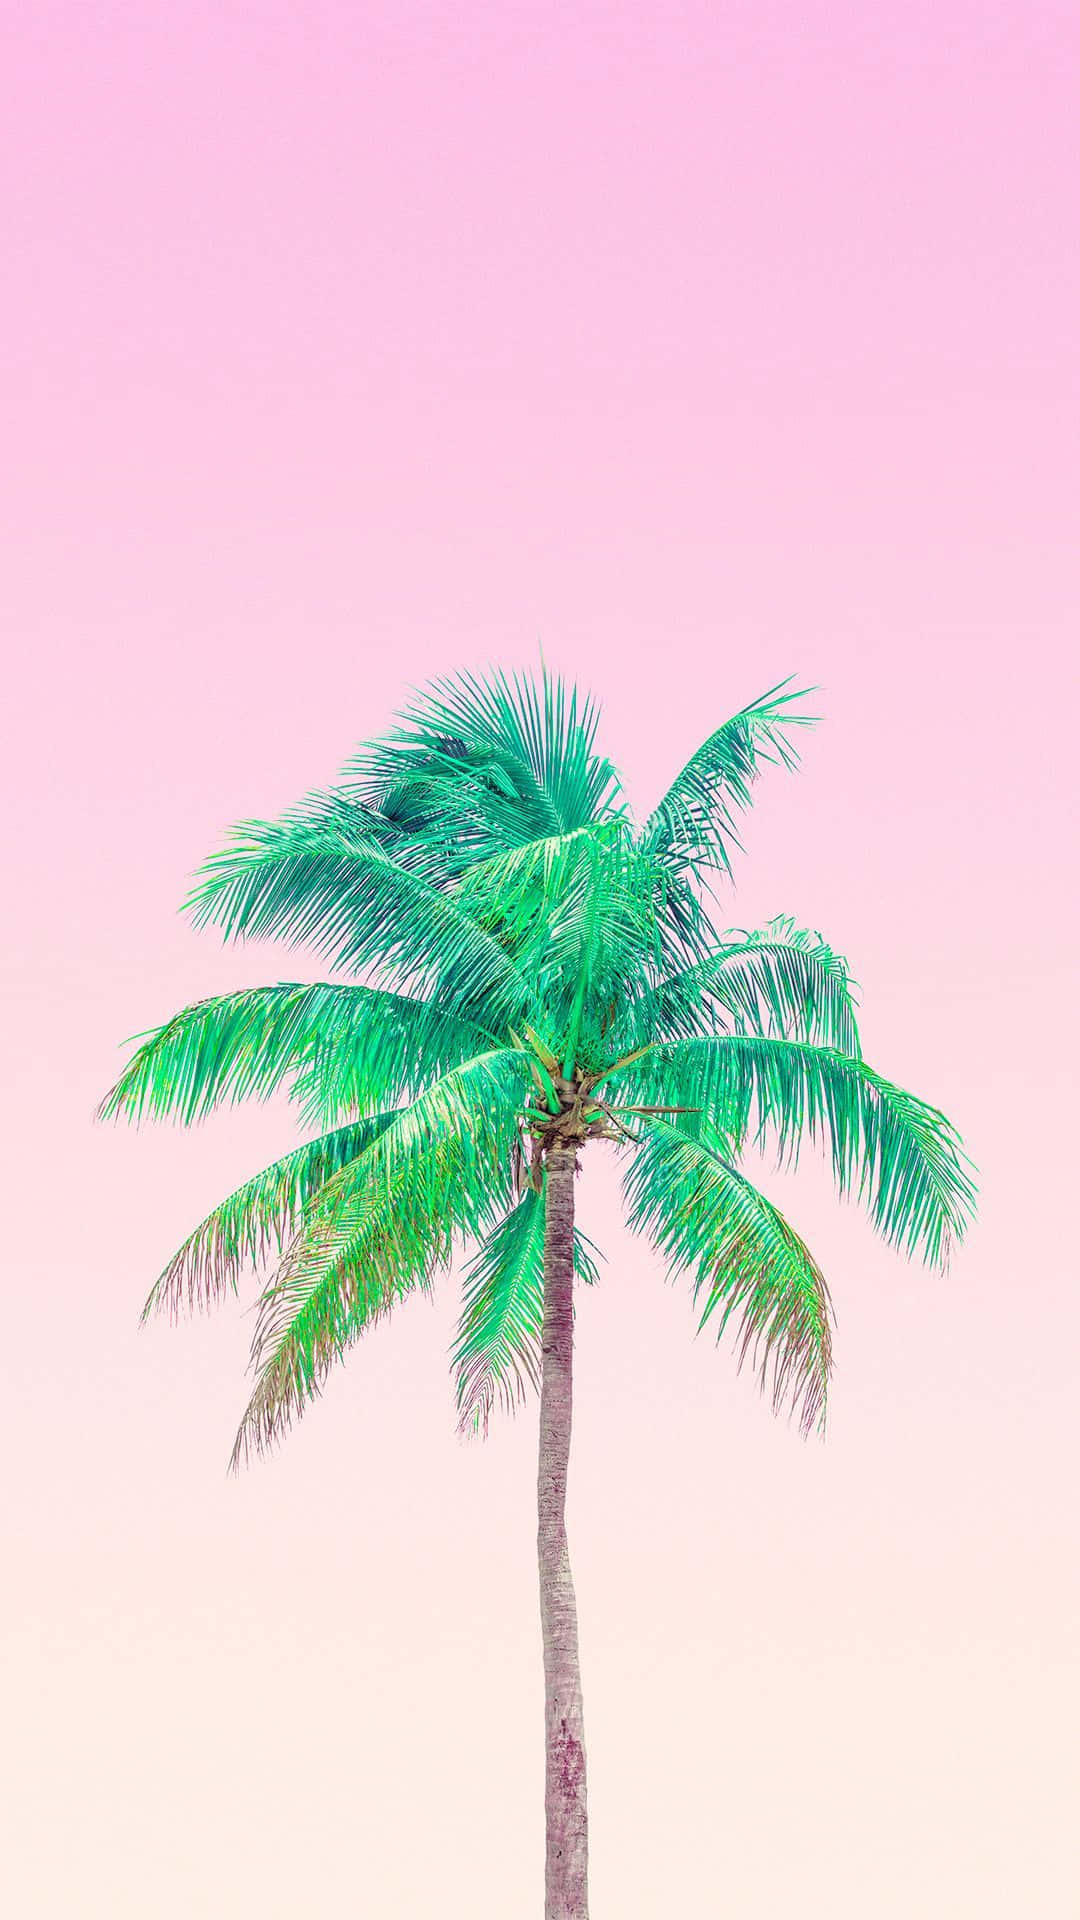 Enjoy the Sunset at this Tropical Beach Framed by a Cute Palm Tree Wallpaper